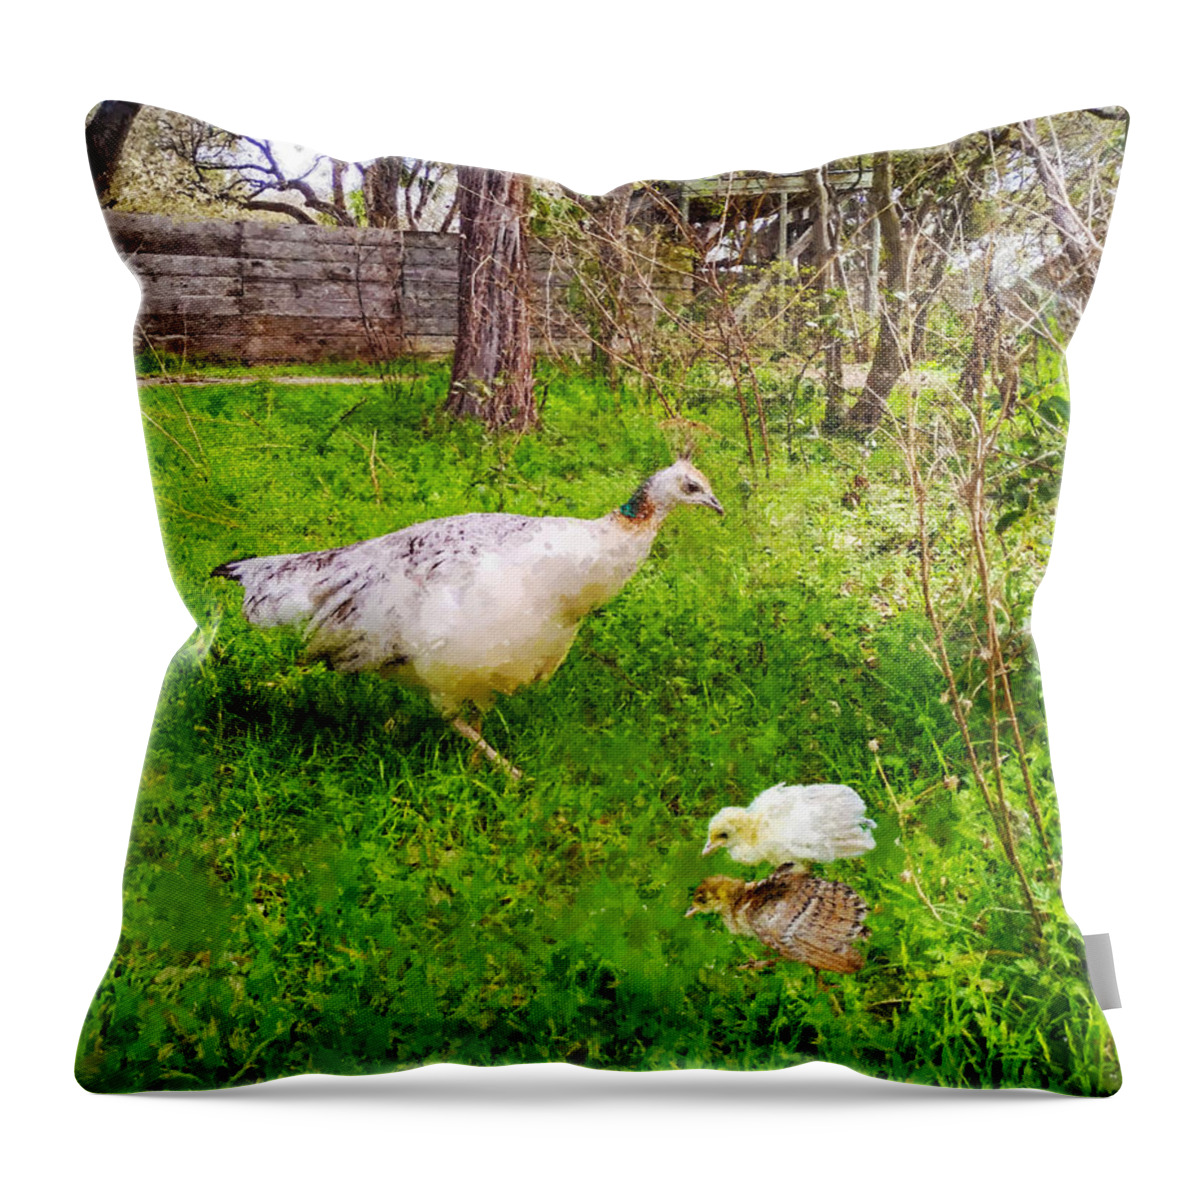 Peahen Throw Pillow featuring the photograph A Peahen And Her Chicks by Sandi OReilly